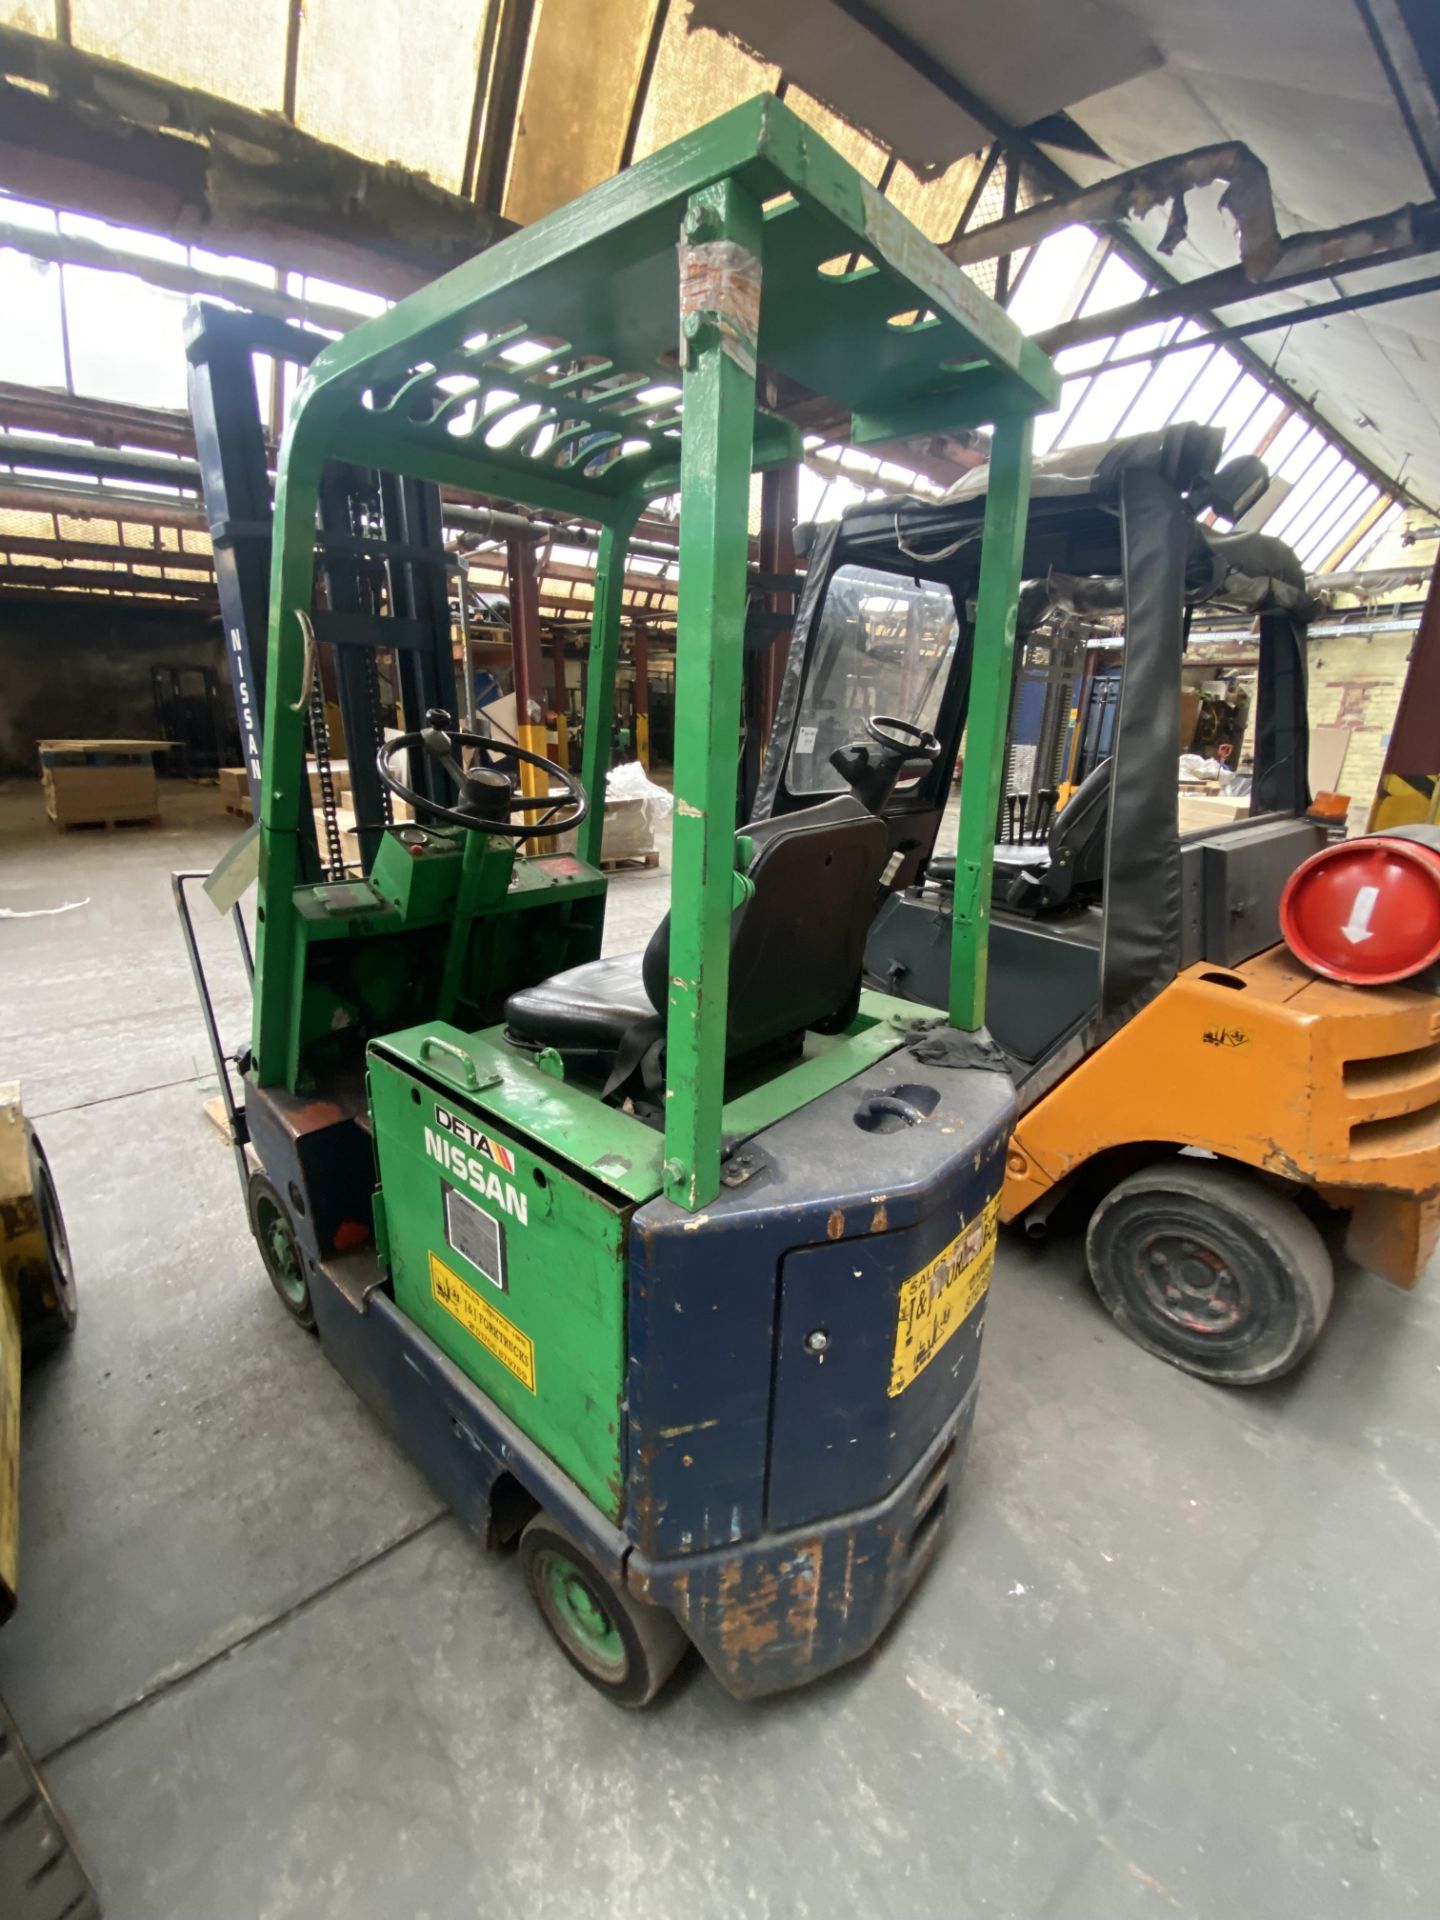 Datsun CEB01 1350kg cap. Electric Fork Lift Truck, serial no. CB01-000184, indicated hours 2112.9 ( - Image 4 of 10